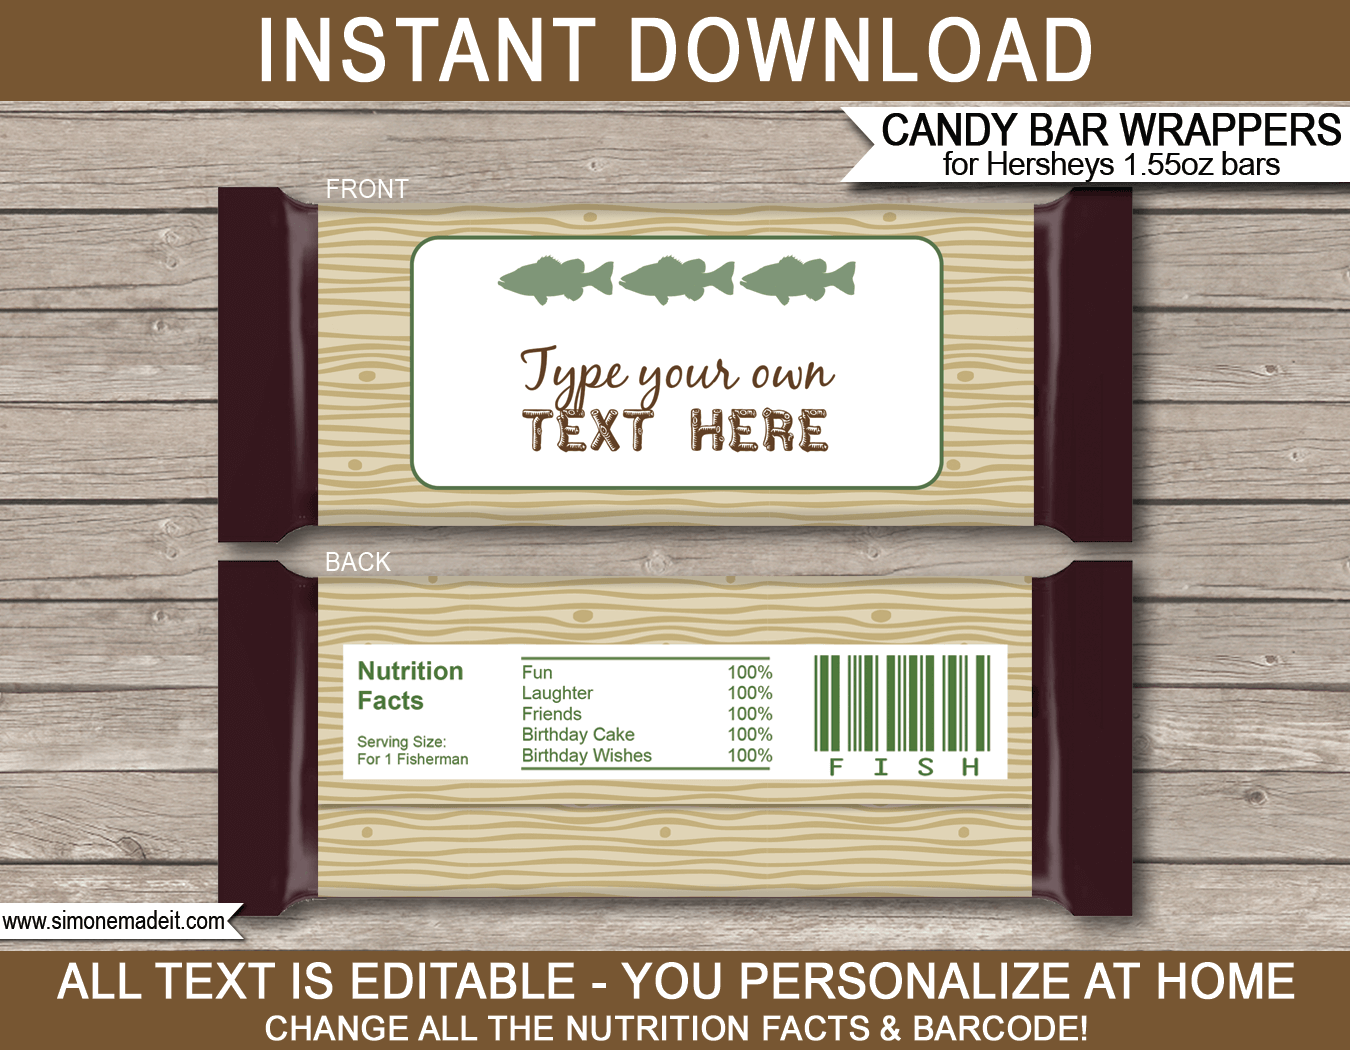 Fishing Hershey Candy Bar Wrappers | Birthday Party Favors | Personalized Candy Bars | Editable Template | INSTANT DOWNLOAD $3.00 via simonemadeit.com